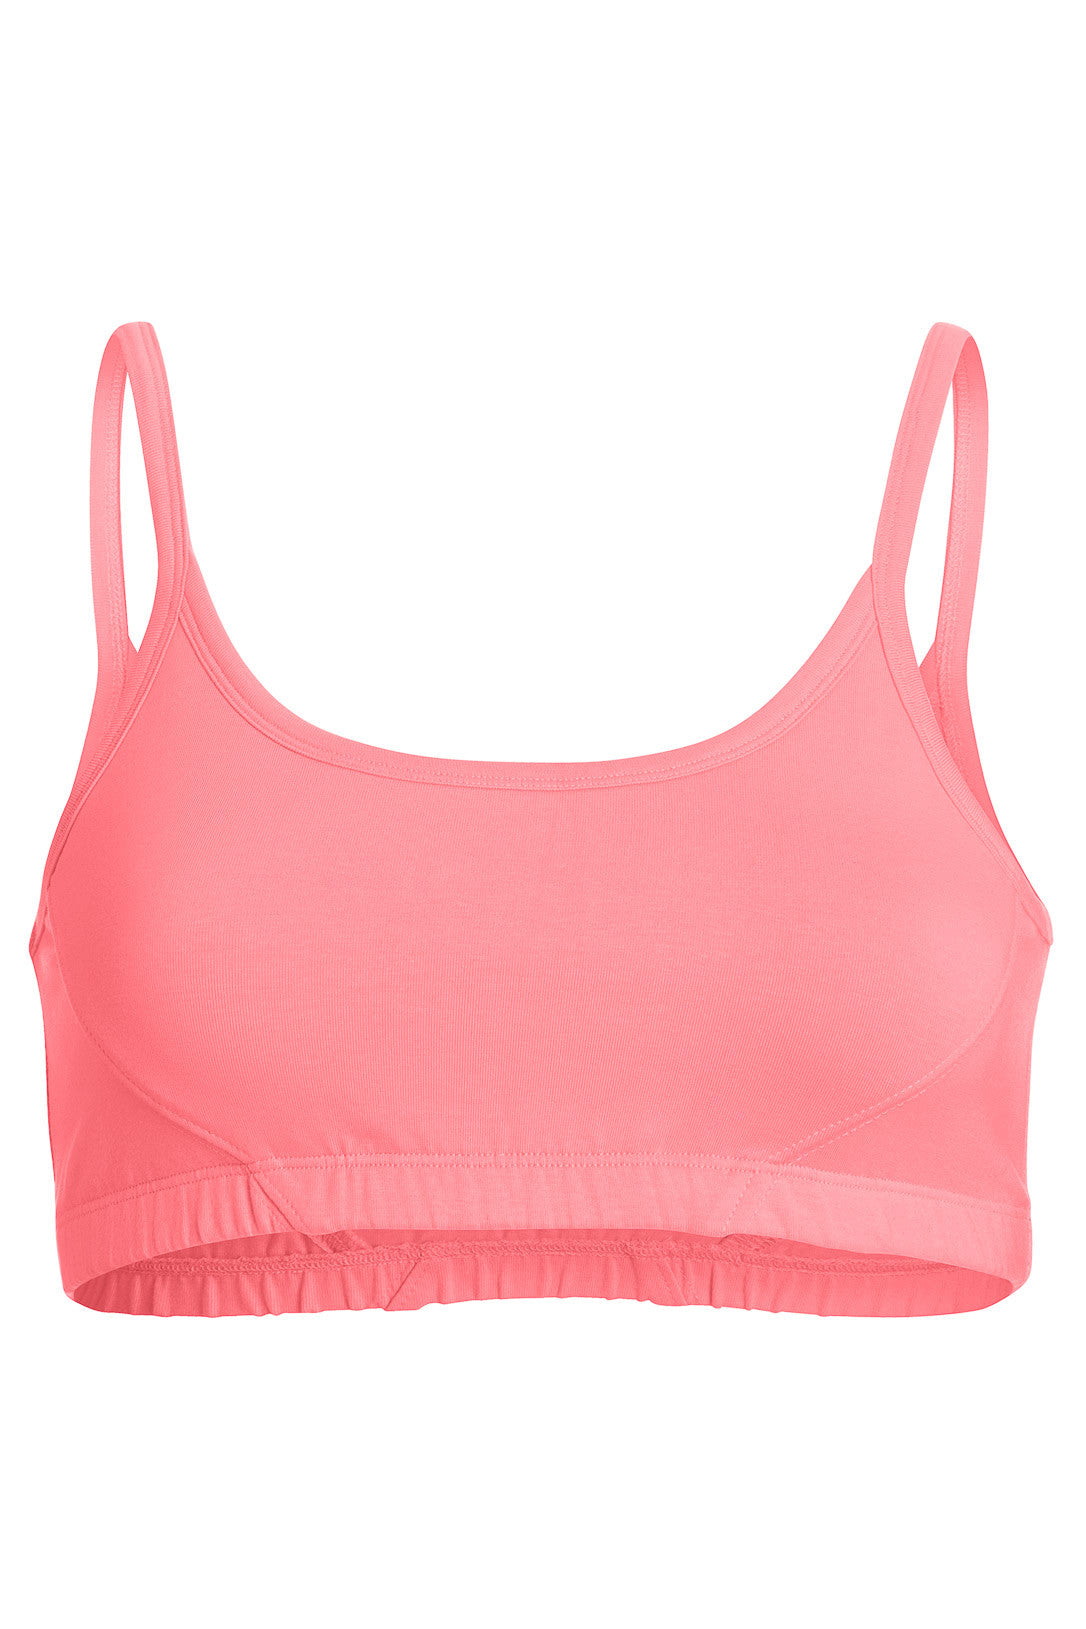 Cotton On Body RECYCLED STRAPPY SPORTS CROP - Medium support sports bra -  posie pink/light pink 